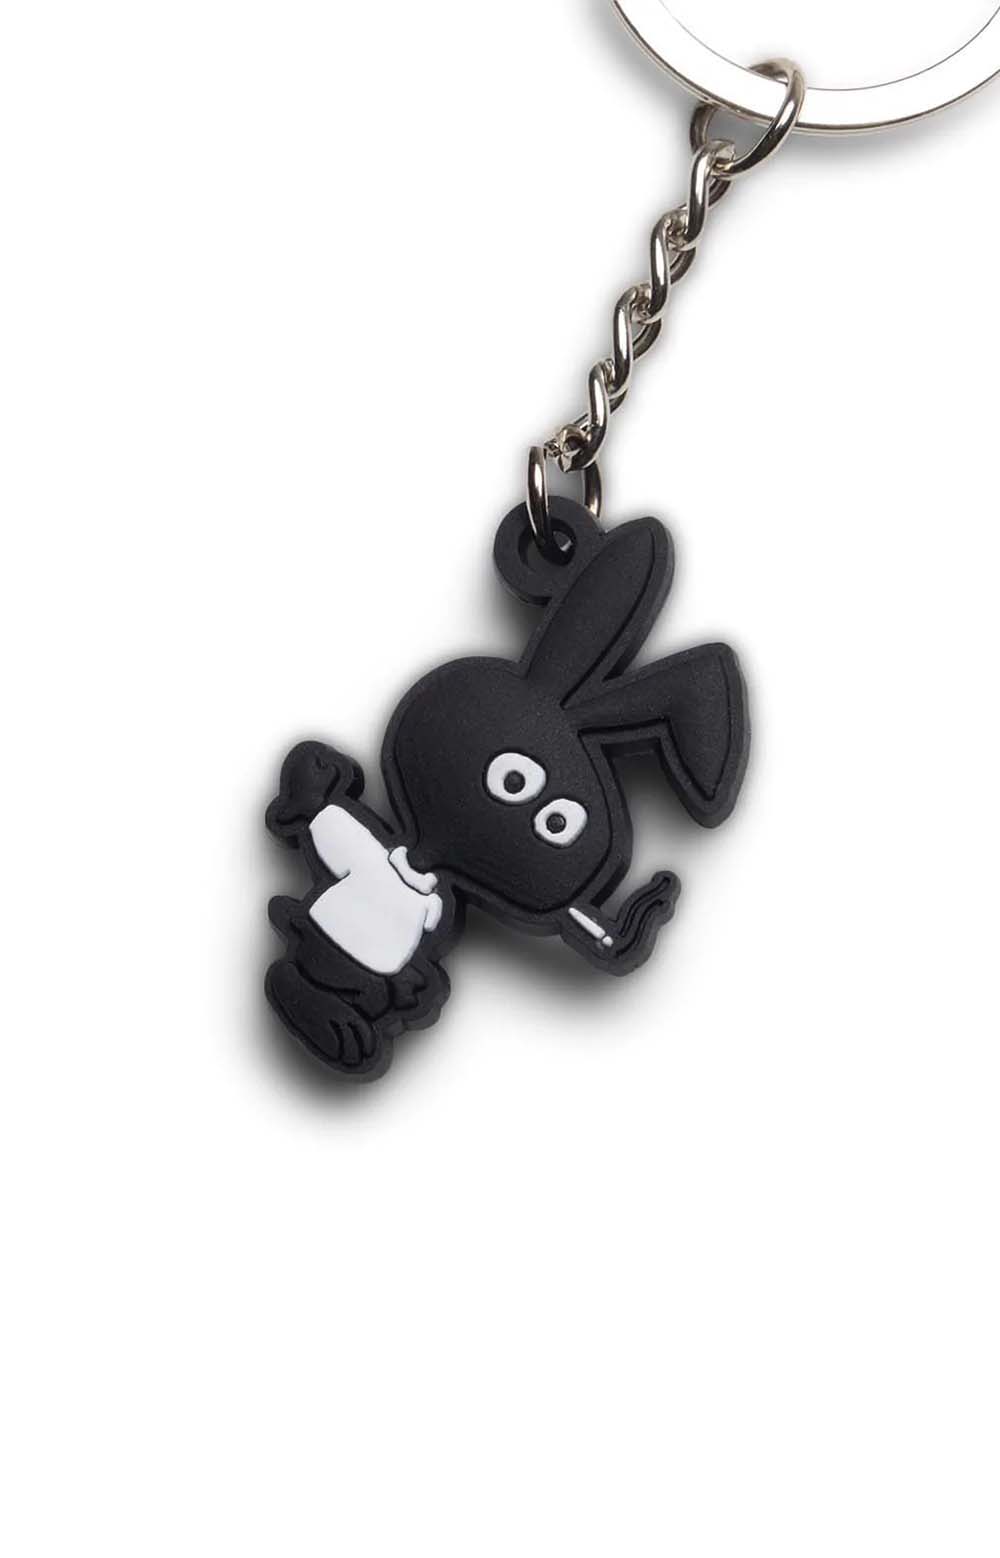 Cold Bunny Rubber Keychain - Black